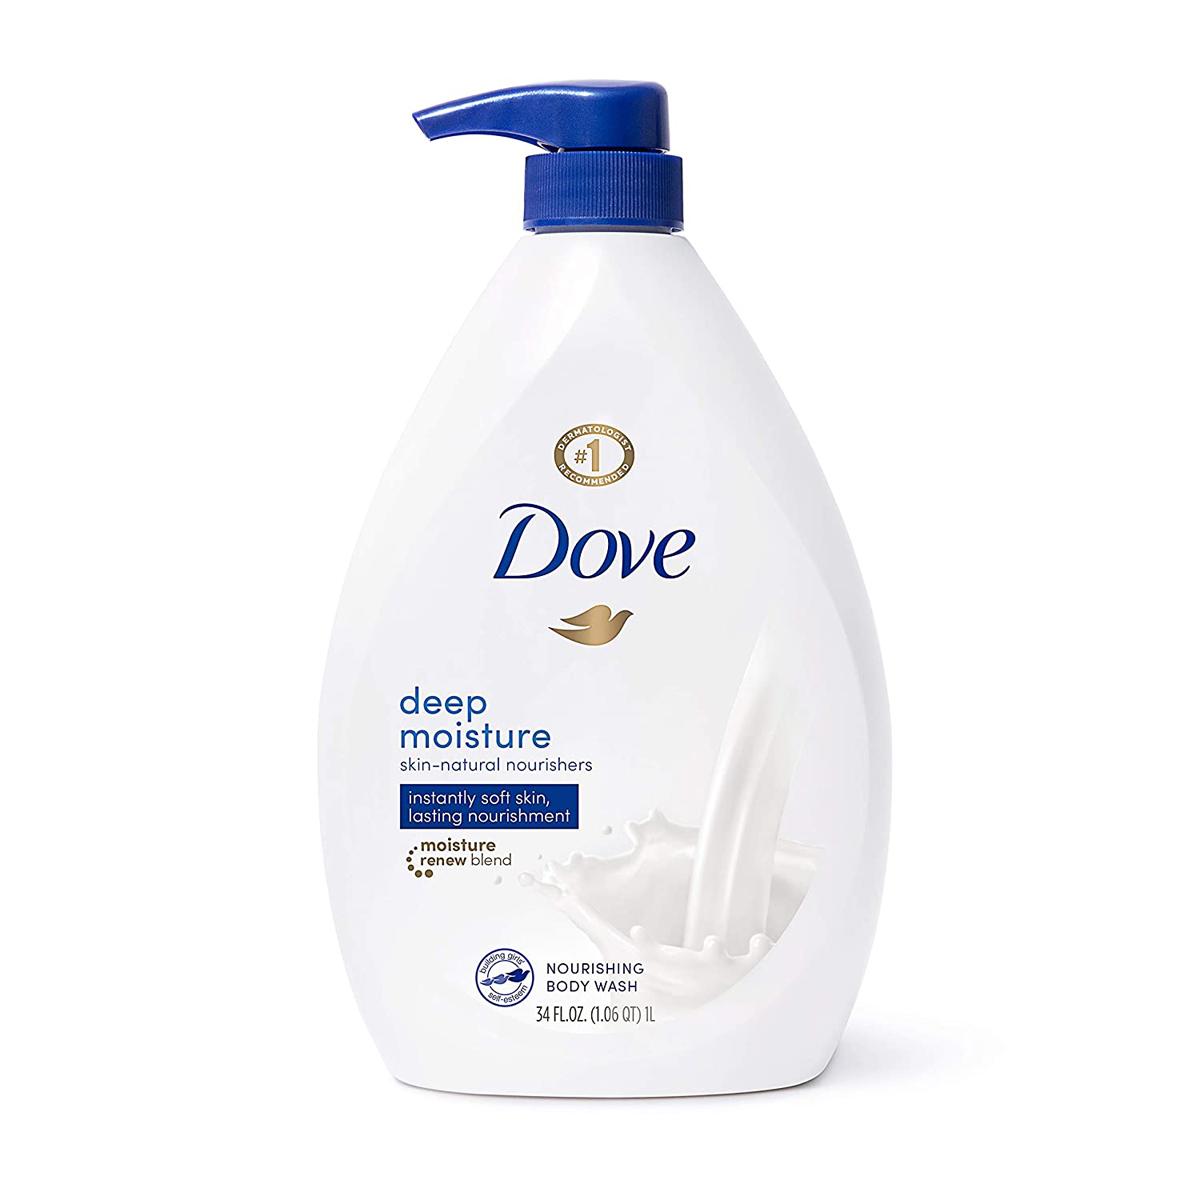 Dove Body Wash with Pump for $6.25 Shipped